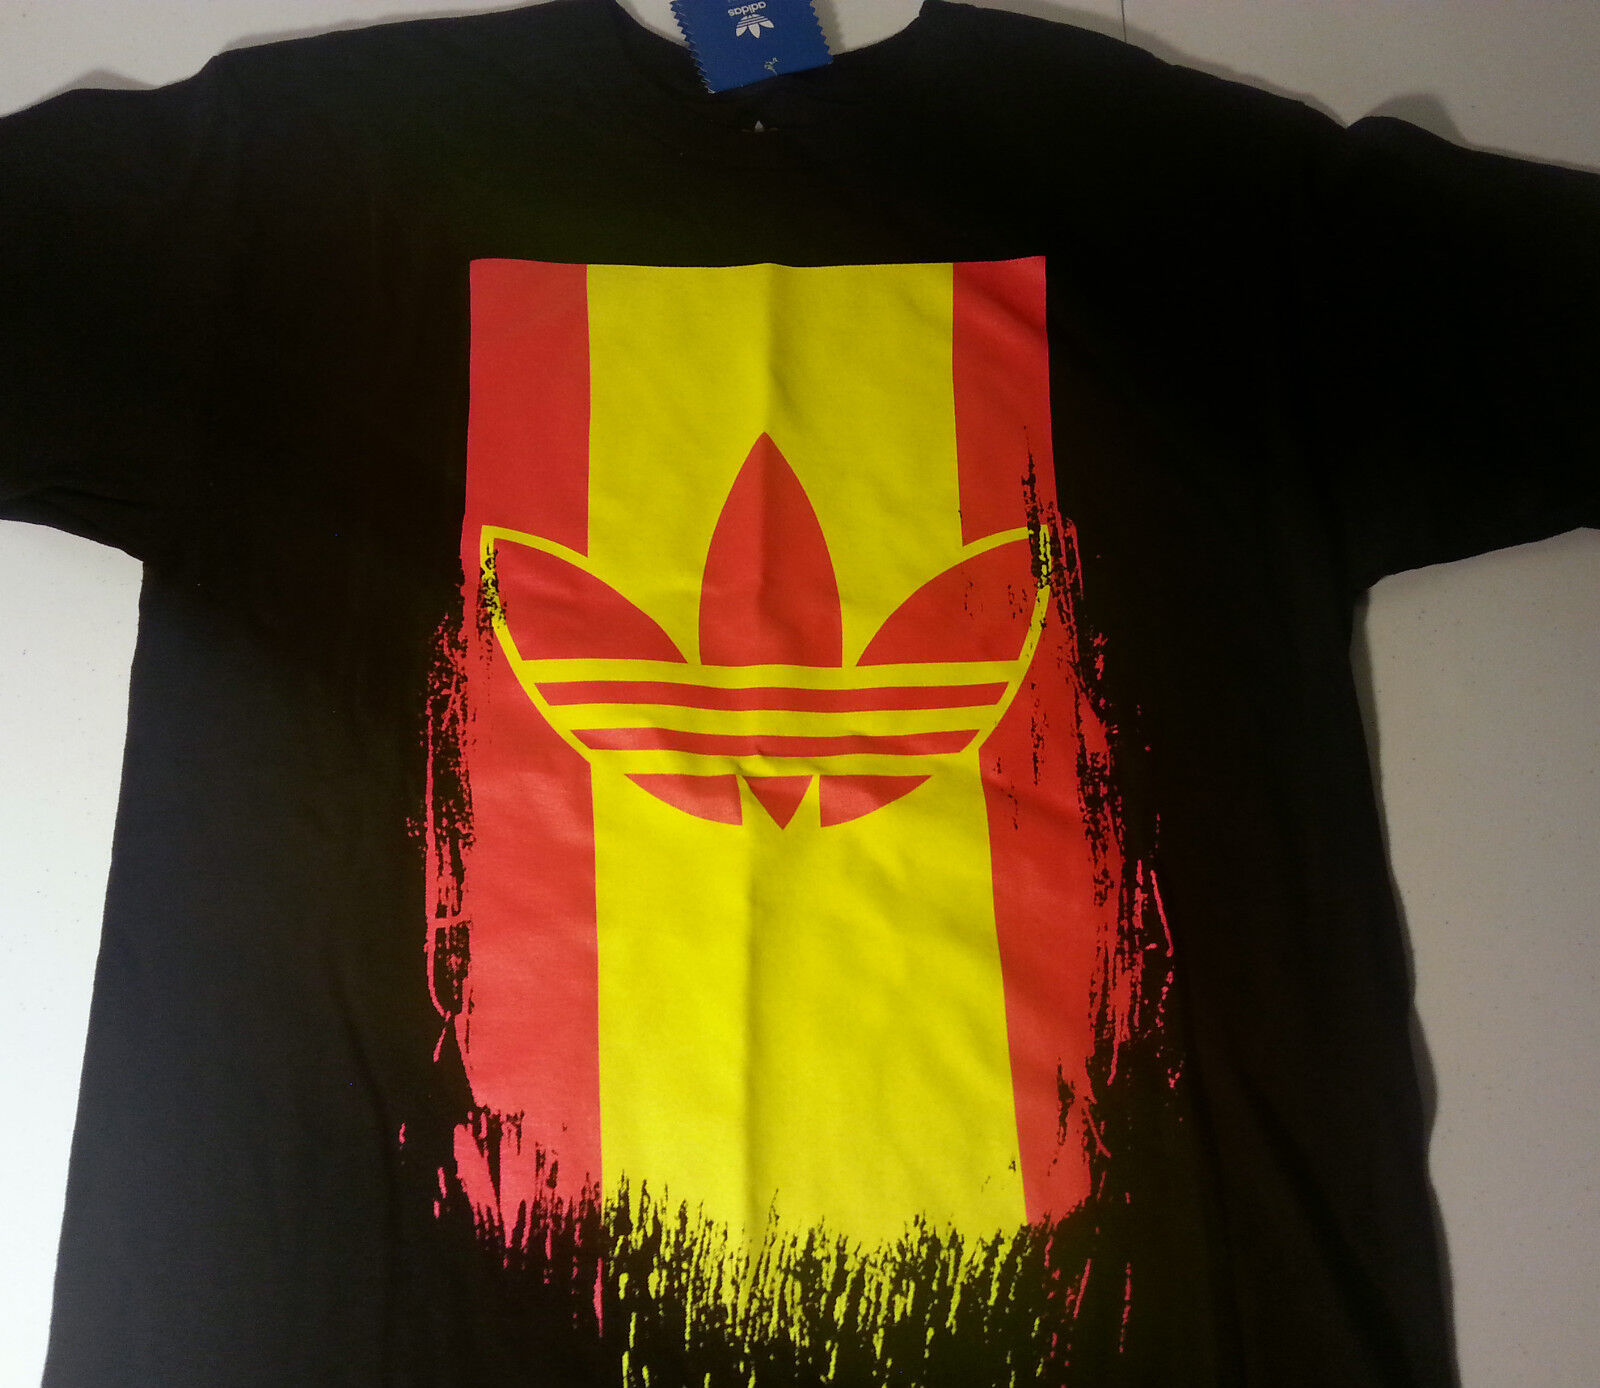 yellow and red adidas